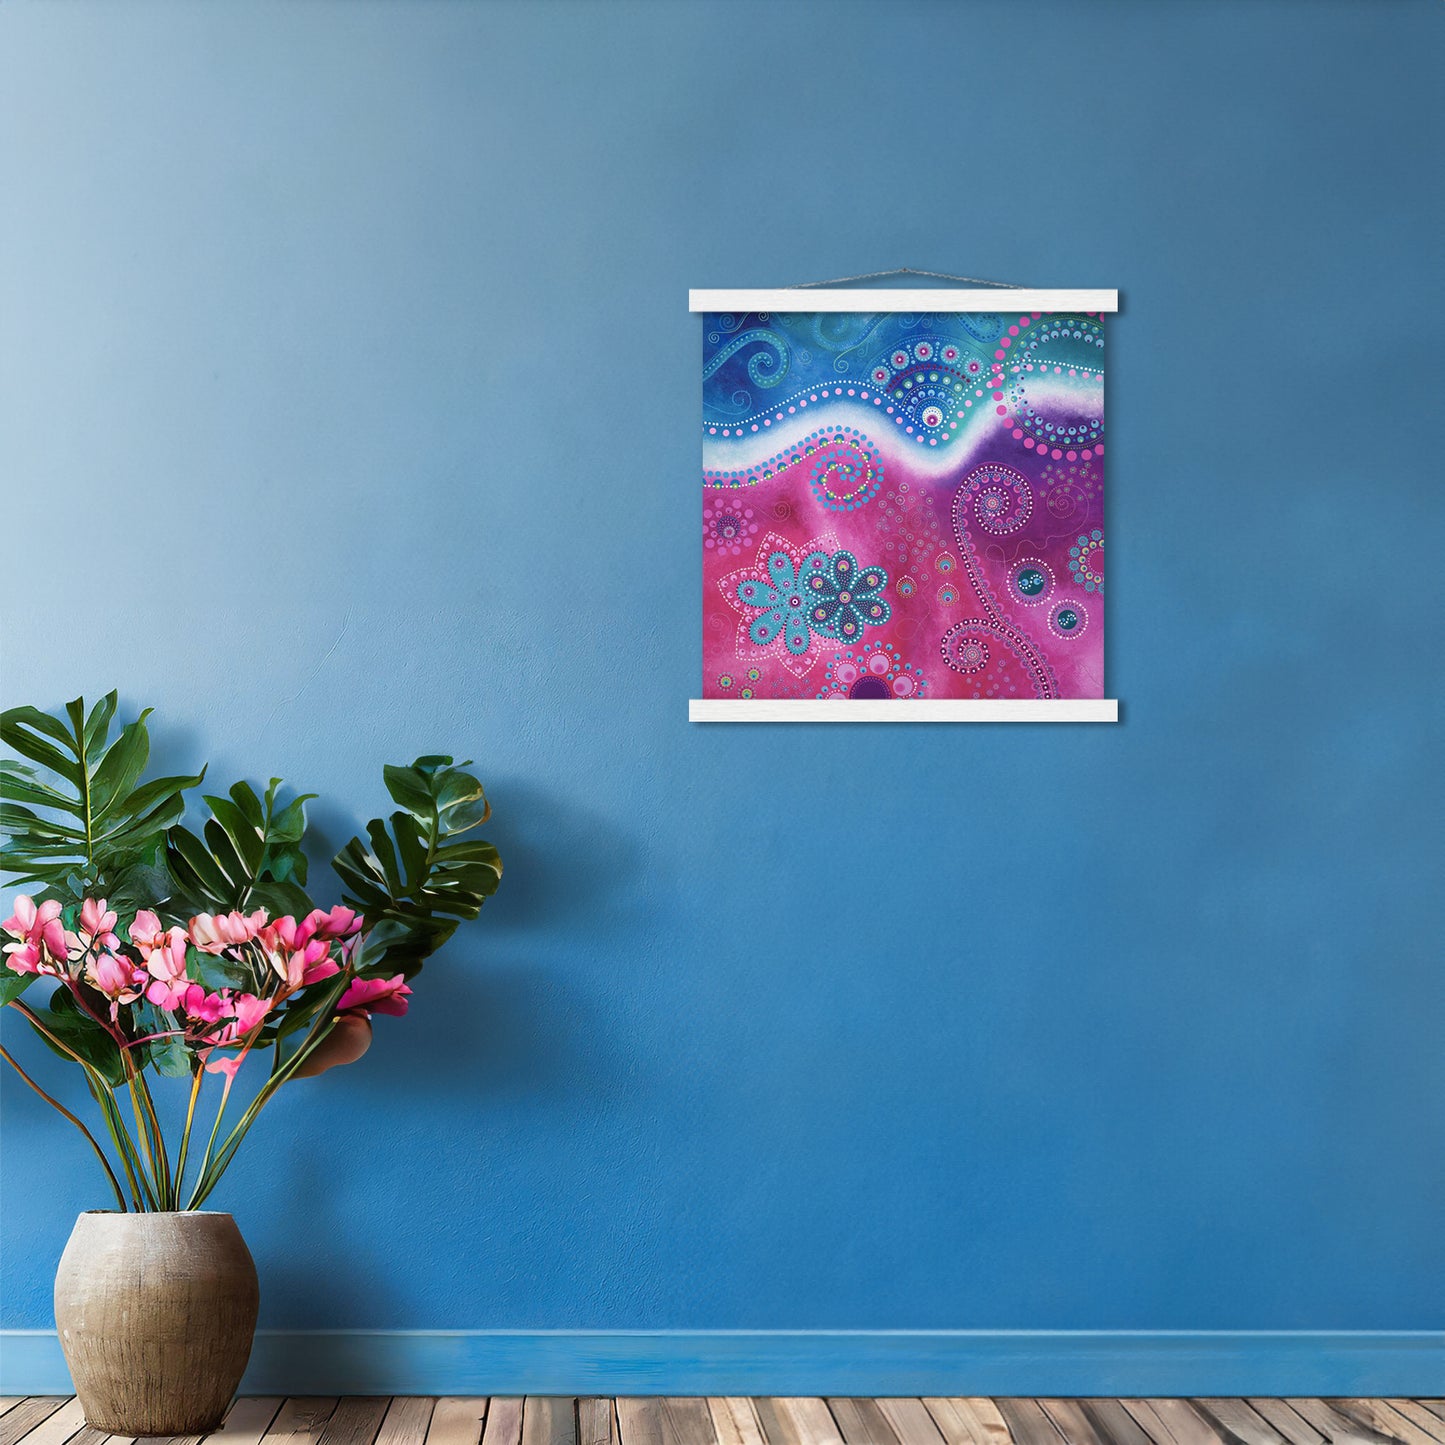 "The Happiness inside" - Blue and pink (original colour) - by Fanny Fay Engström